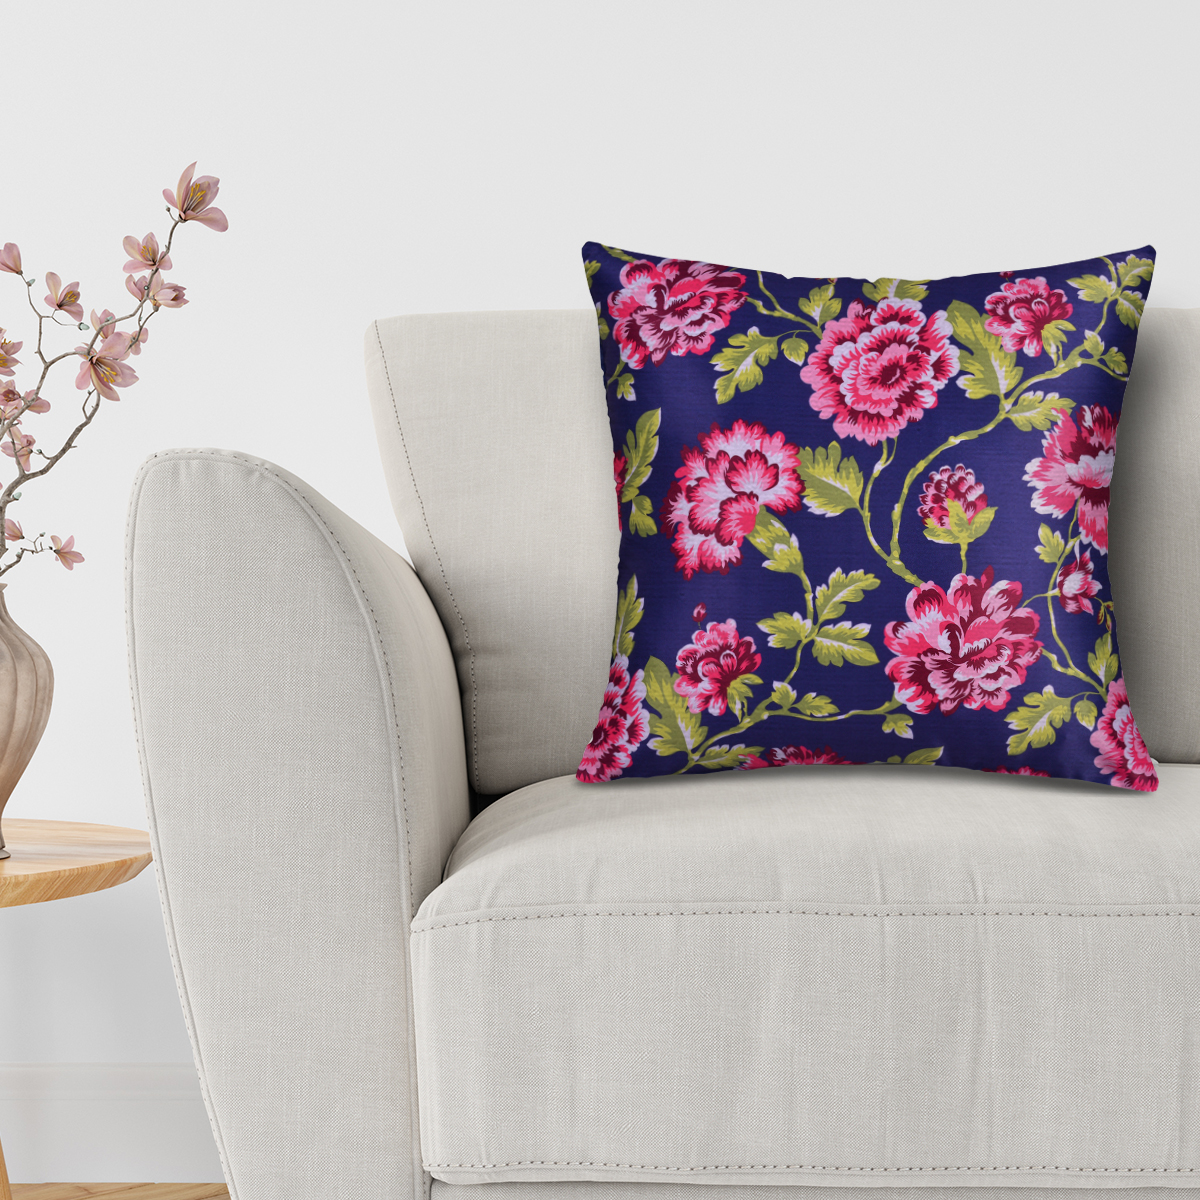 Throw Pillow Covers Set of 1 for Living Room Table, Floral Printed Cushion Case, 20x20 inches - Dark Blue - Home Decor - image 3 of 7